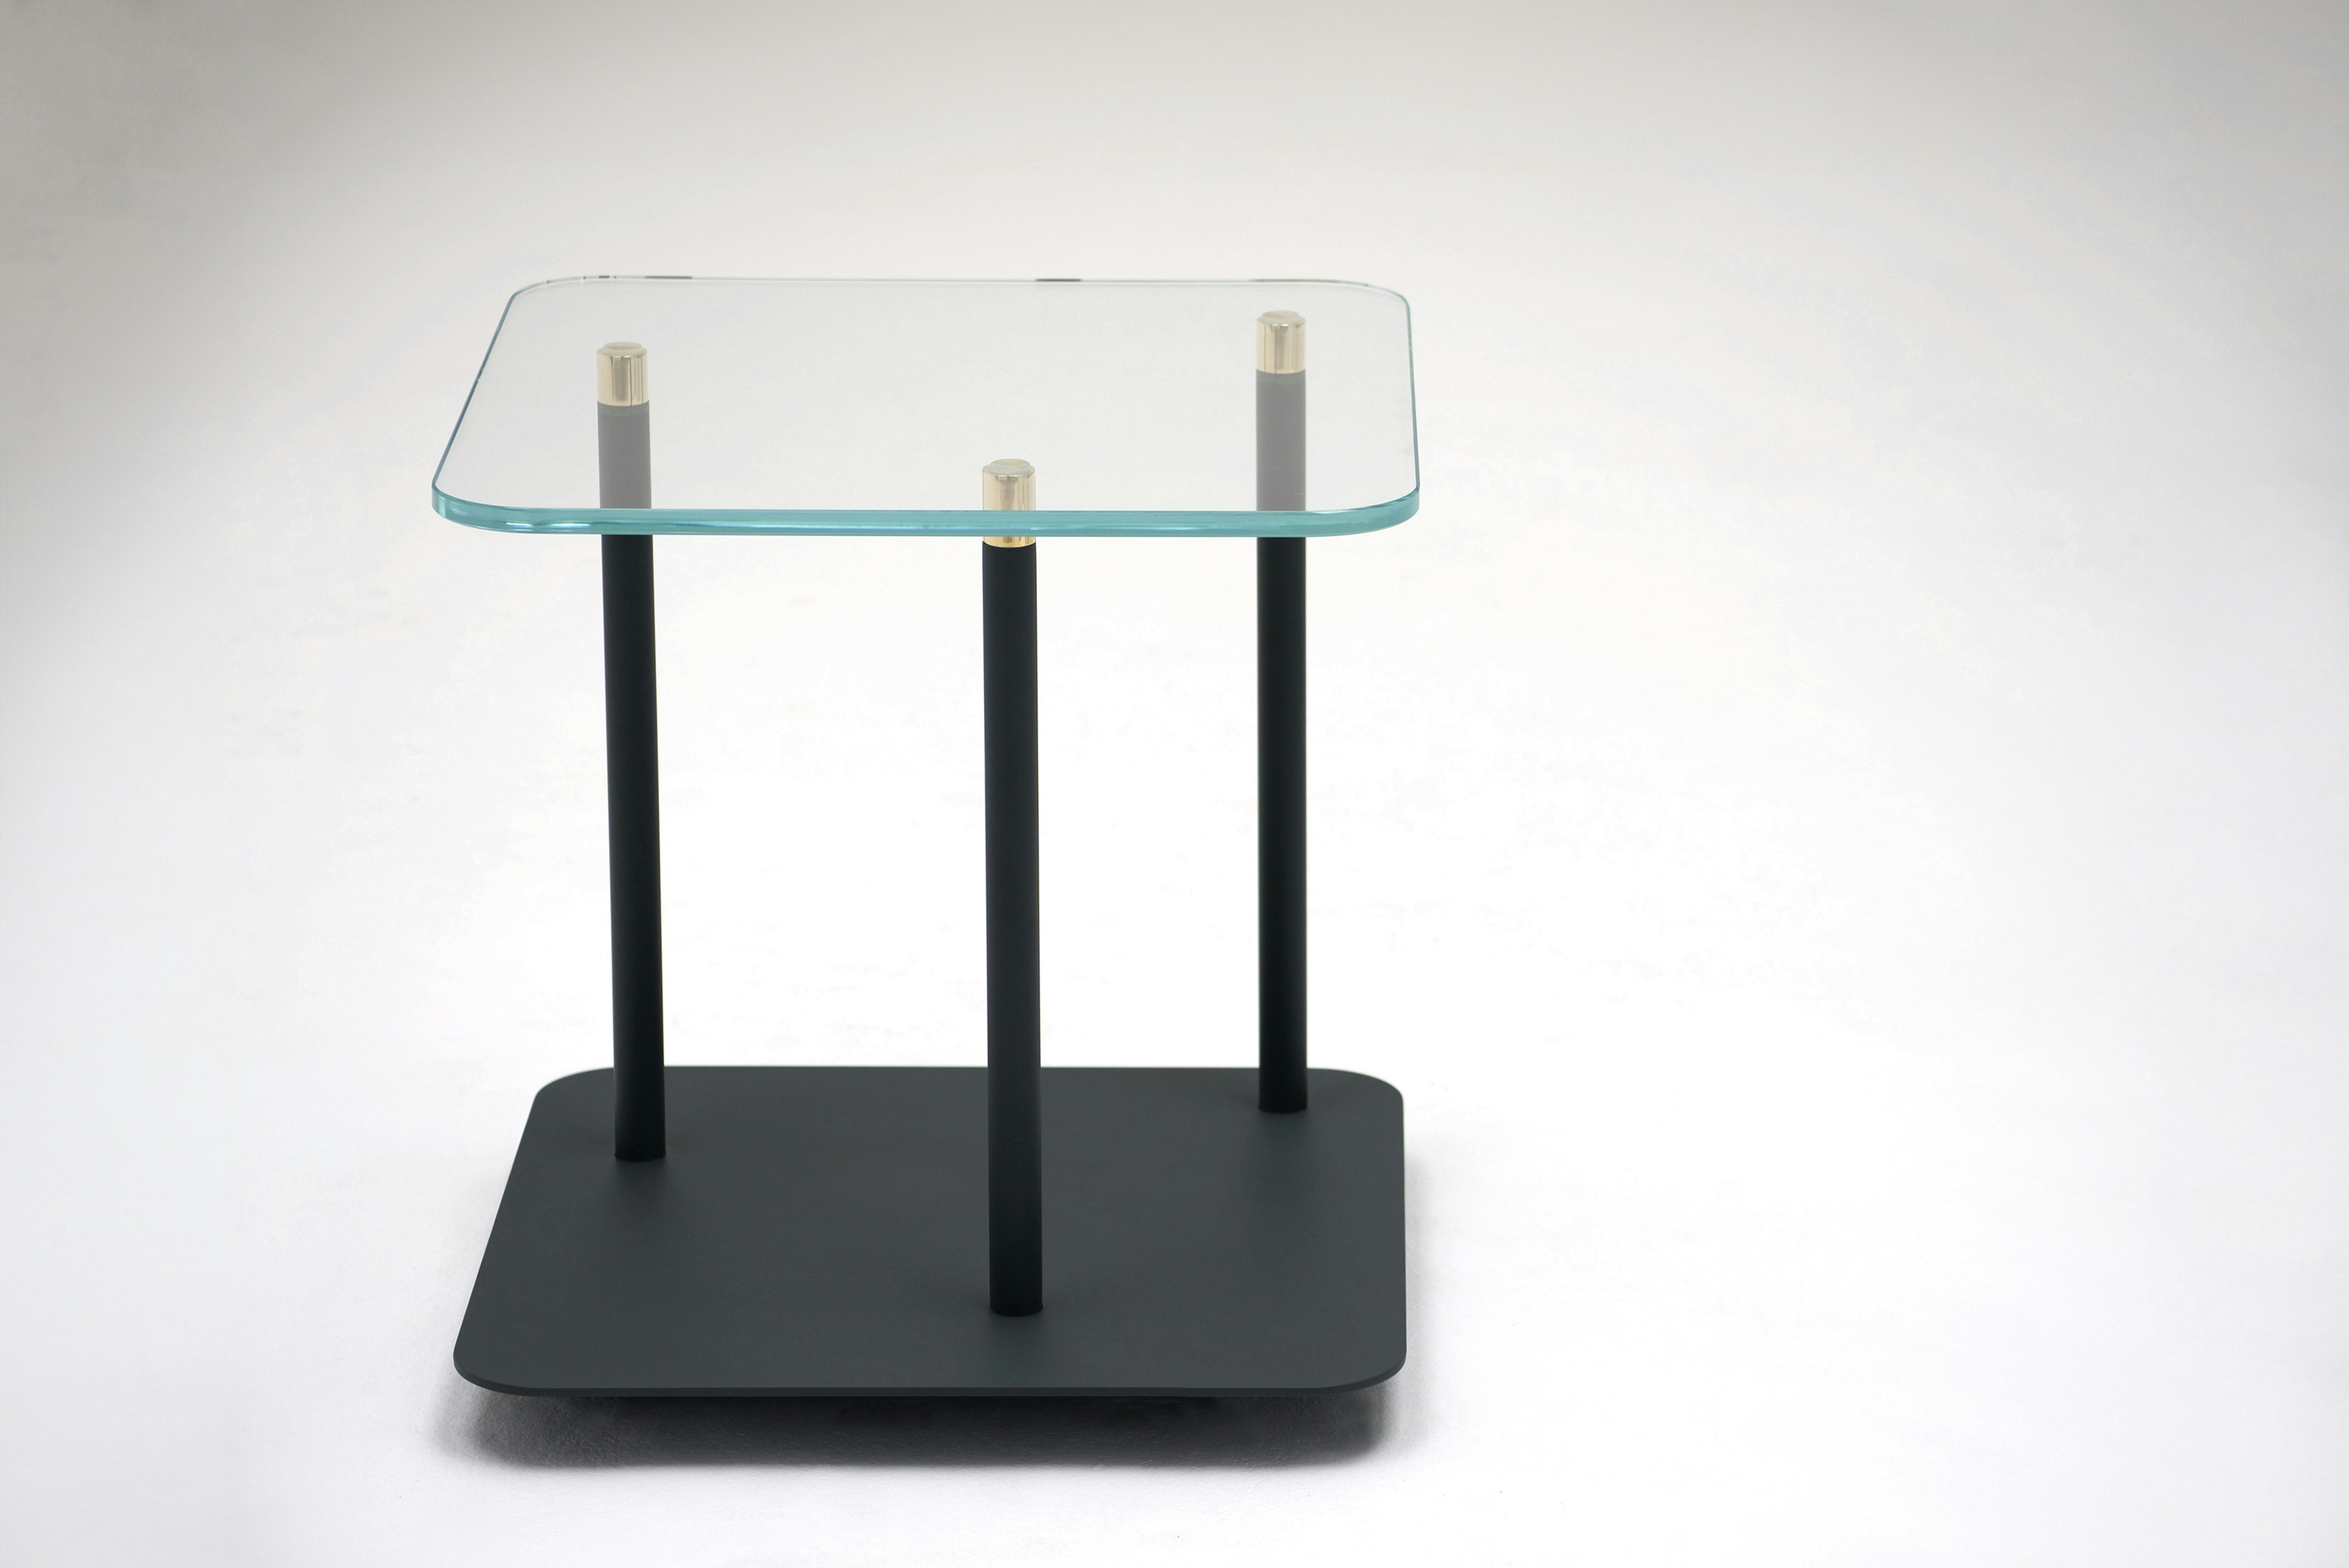 Phase Design Reza Feiz Points Of Interest Side Table 1 Product Page Web